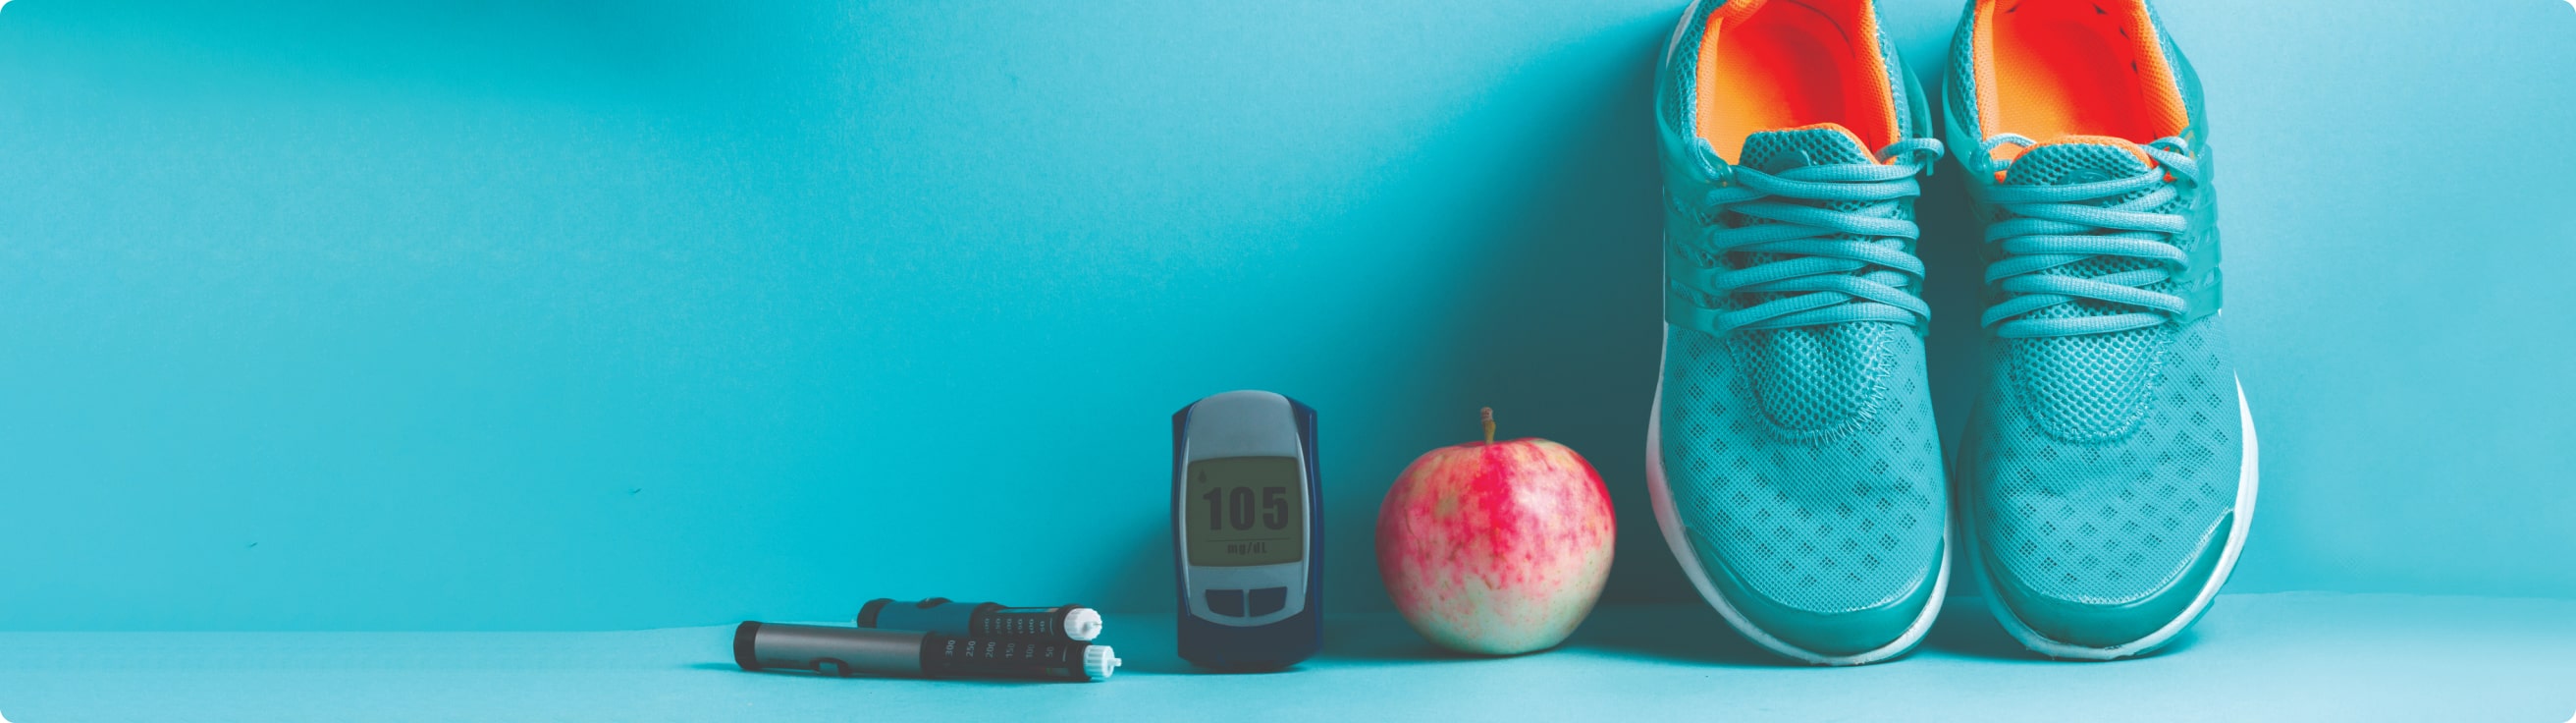 diabetes and physical activity